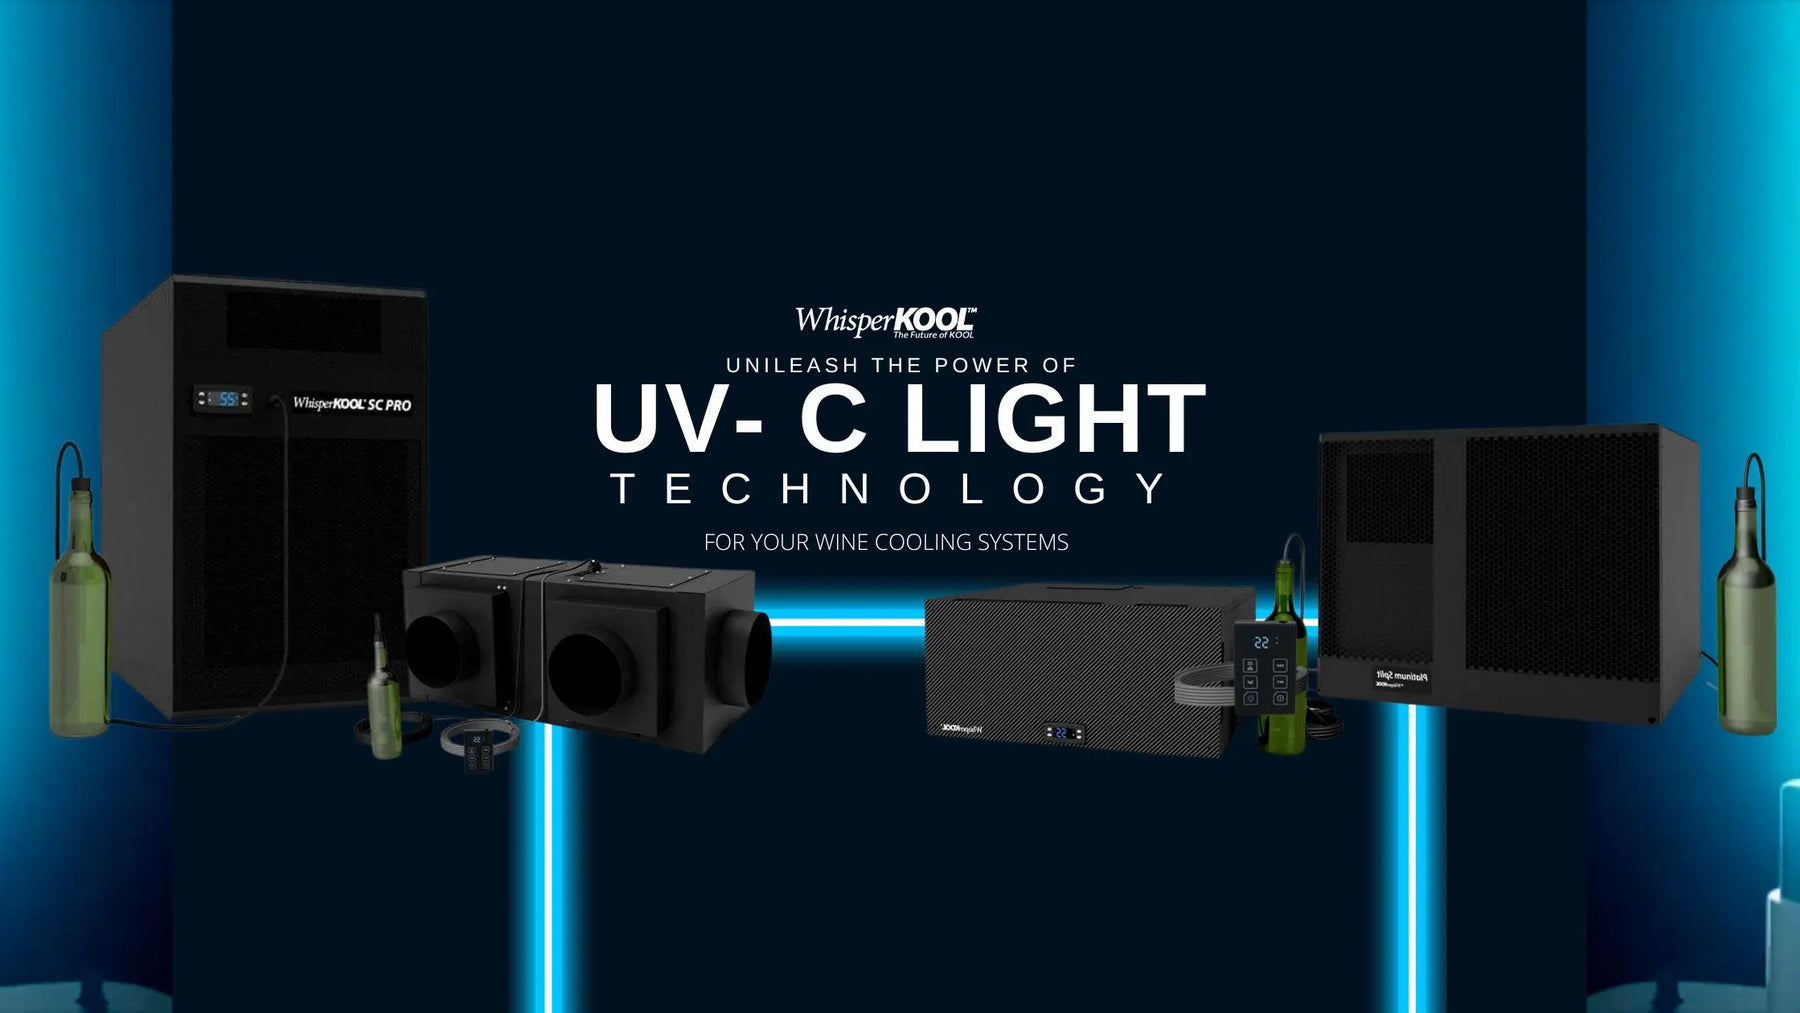 UV-C Light Technology for Wine Cellar Cooling Units | Wine Coolers Empire - Trusted Dealer